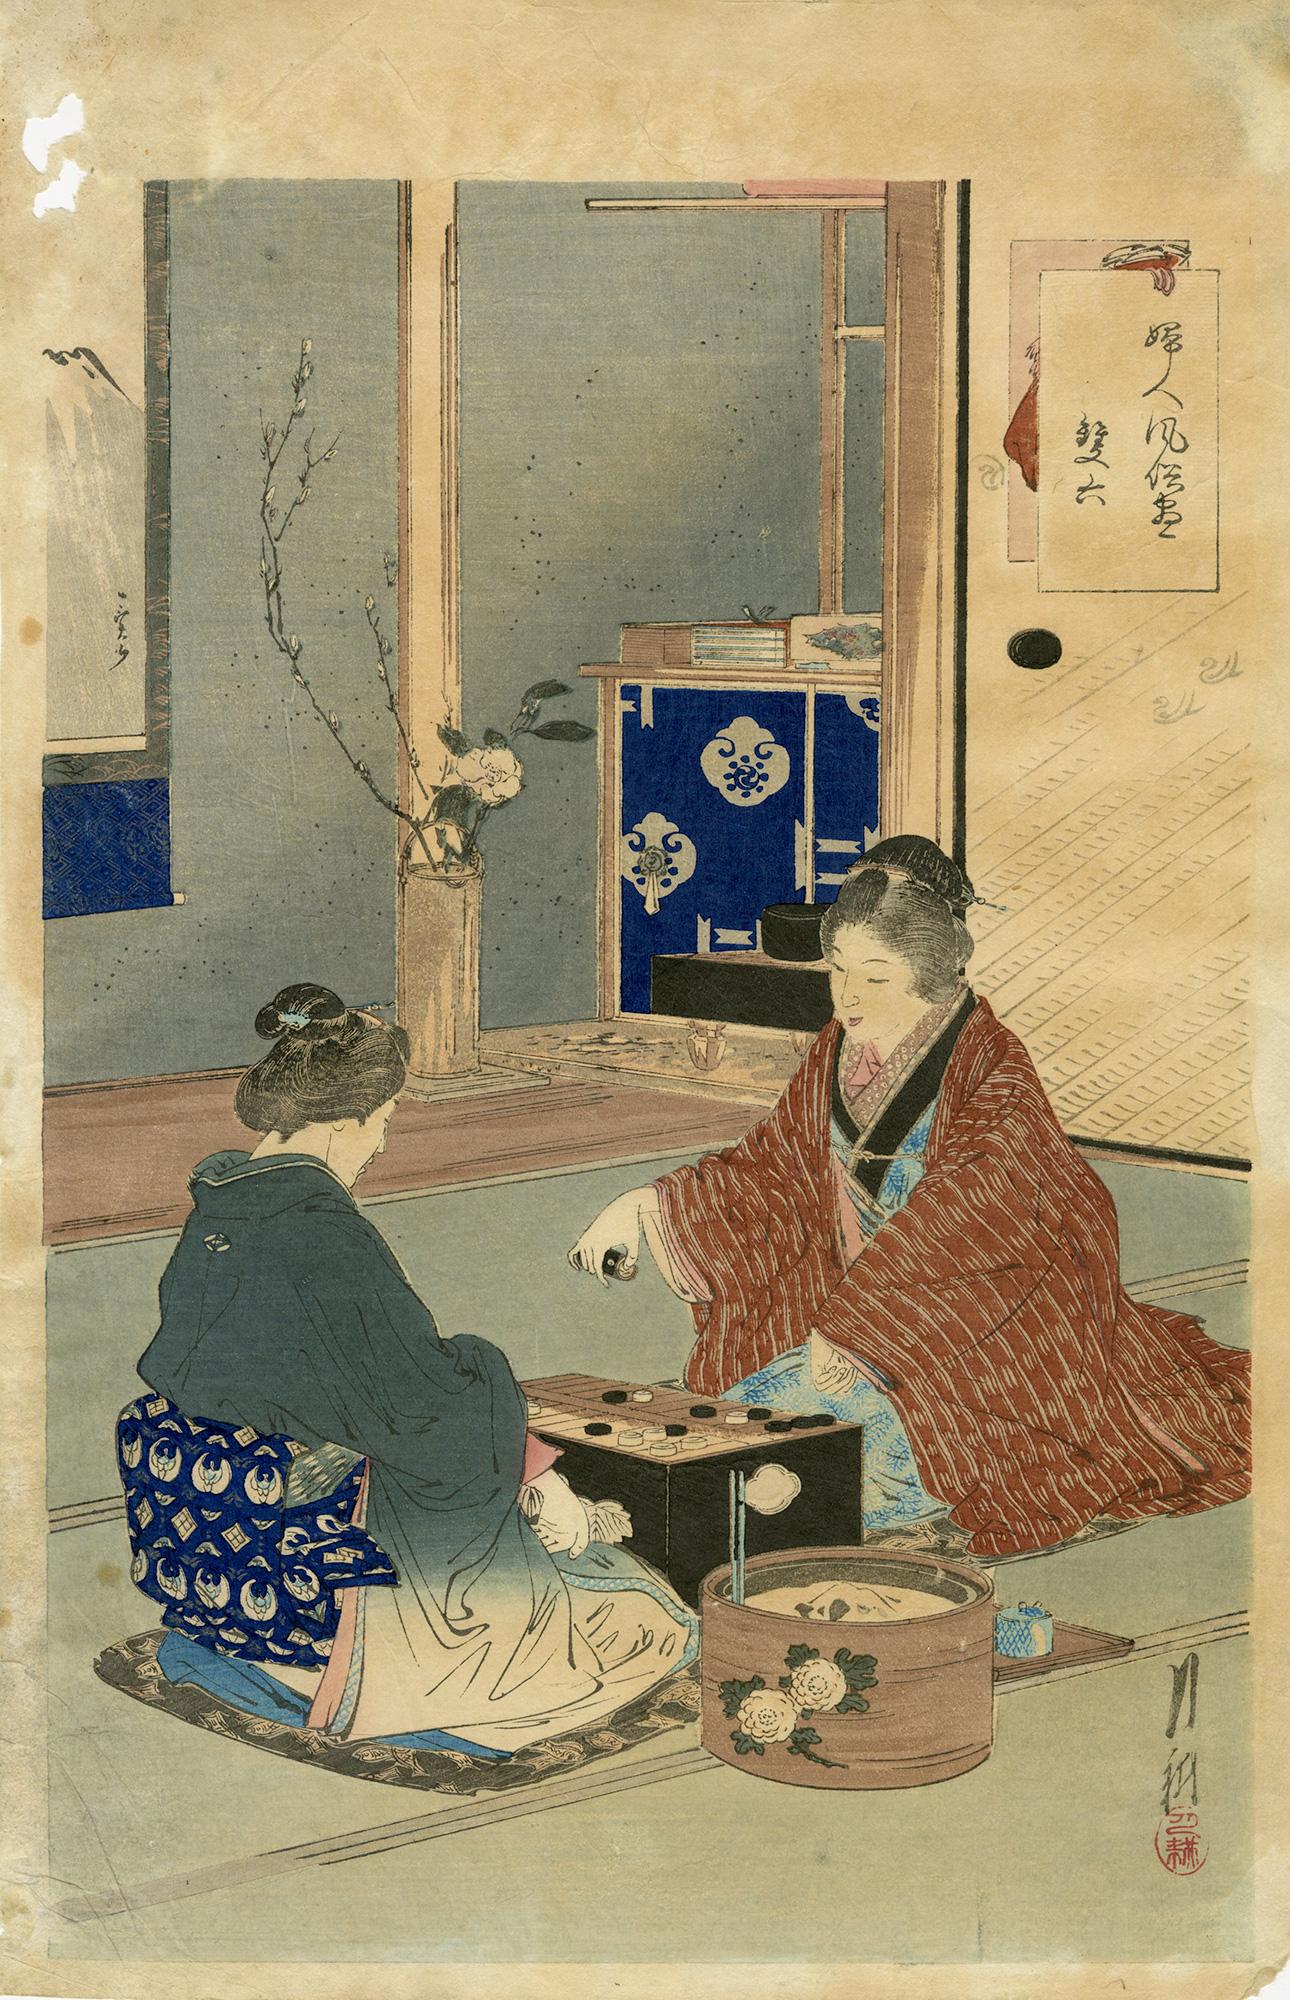 Two Women Playing Sugoroku from "Comparison of the Customs of Beauties."